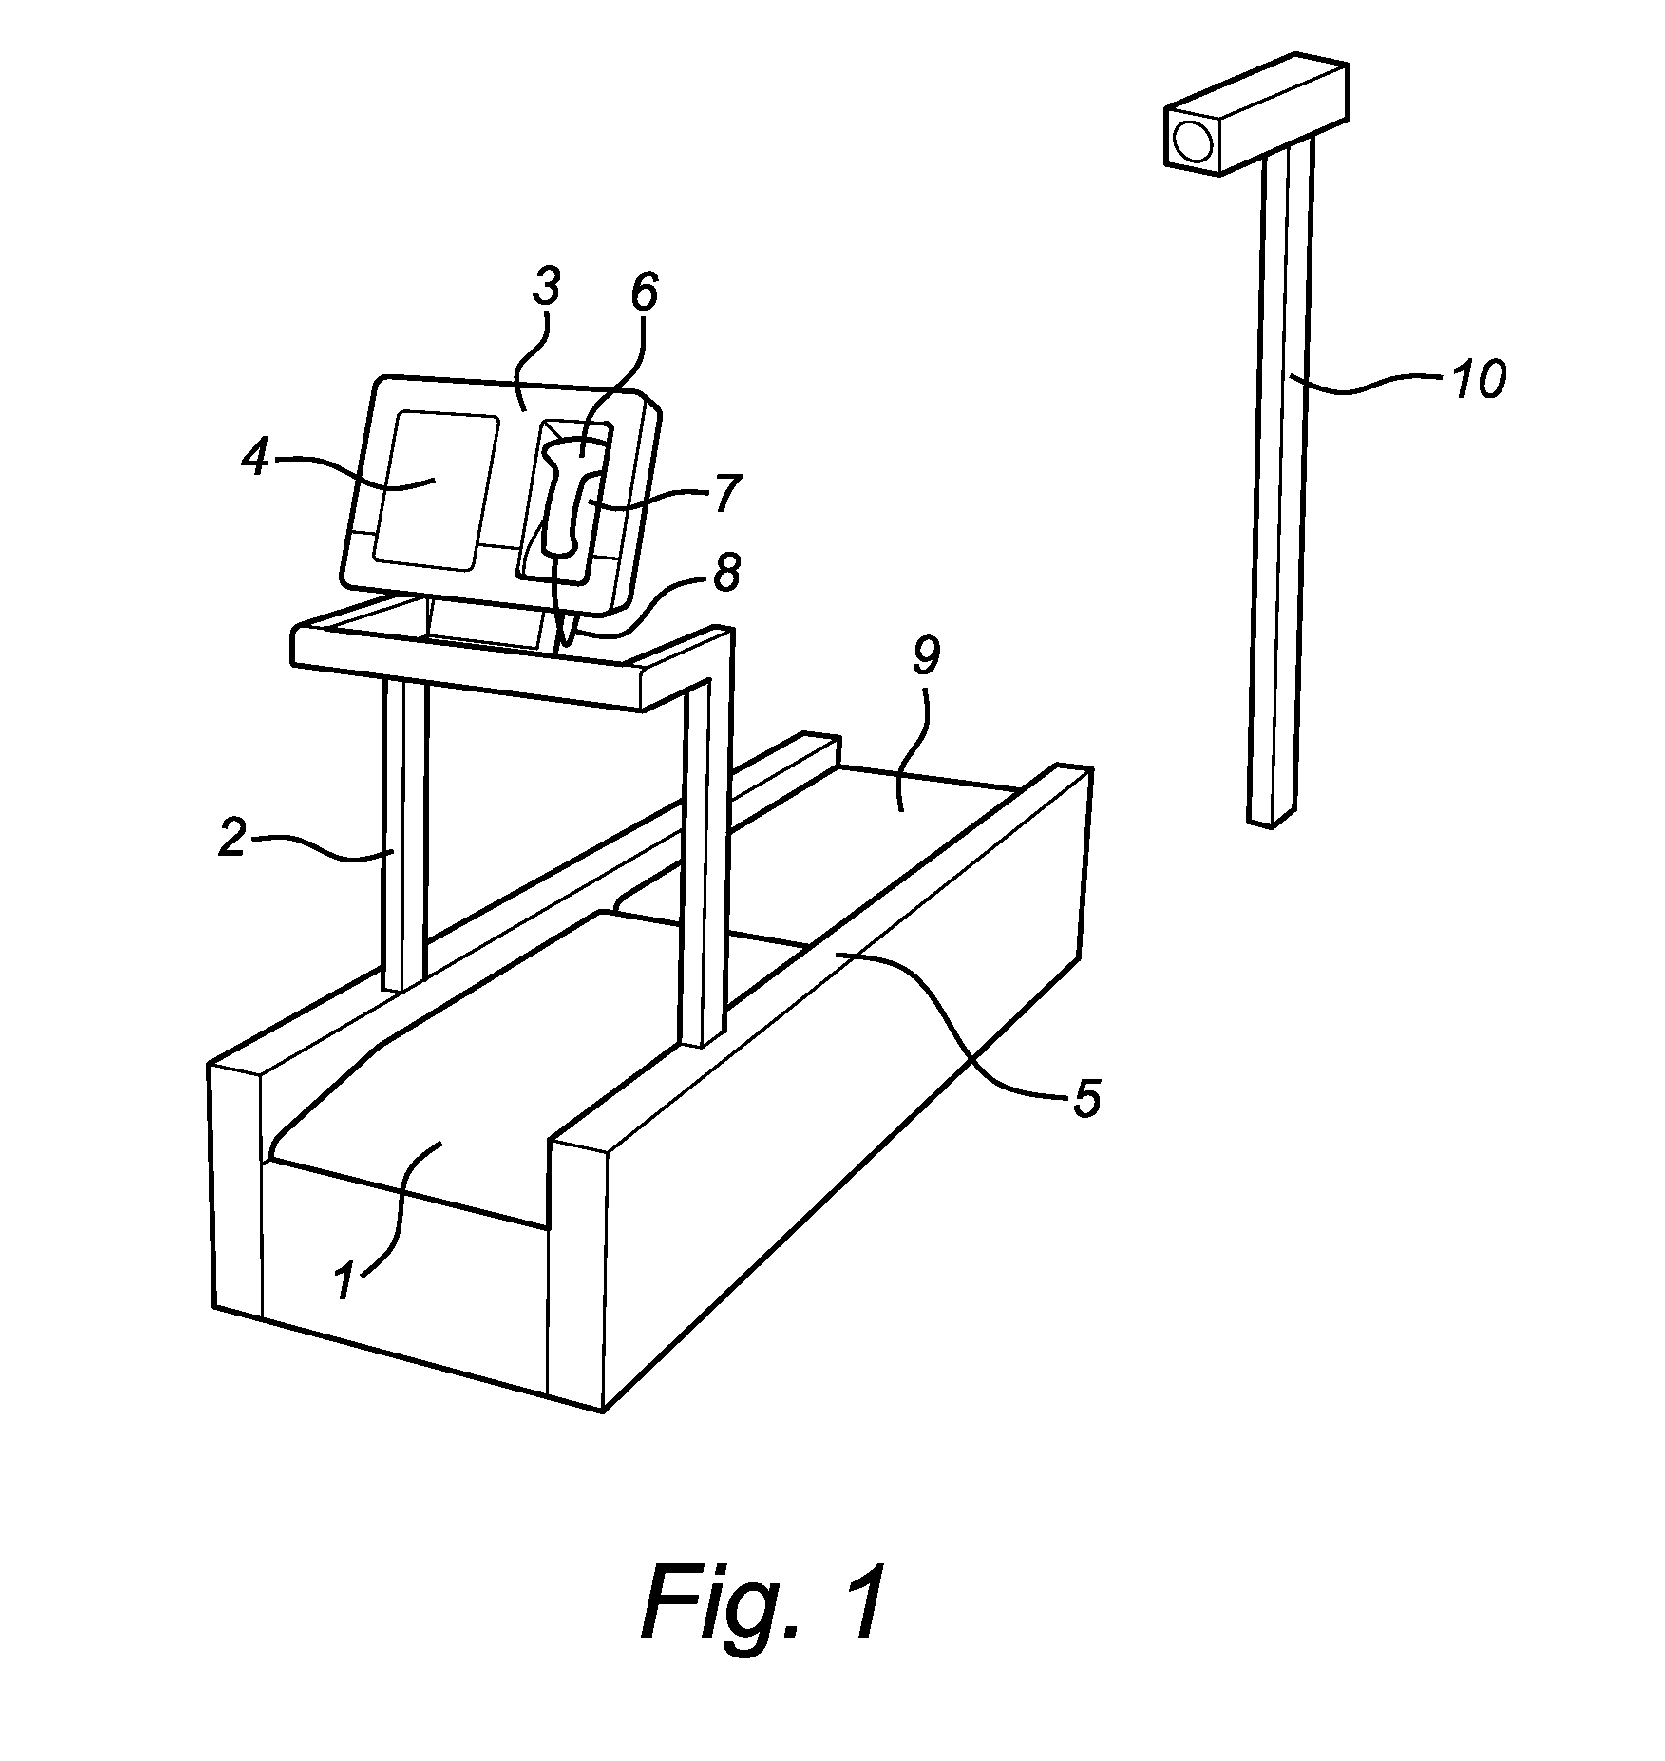 Method and system for depositing and checking of baggage into airline flights